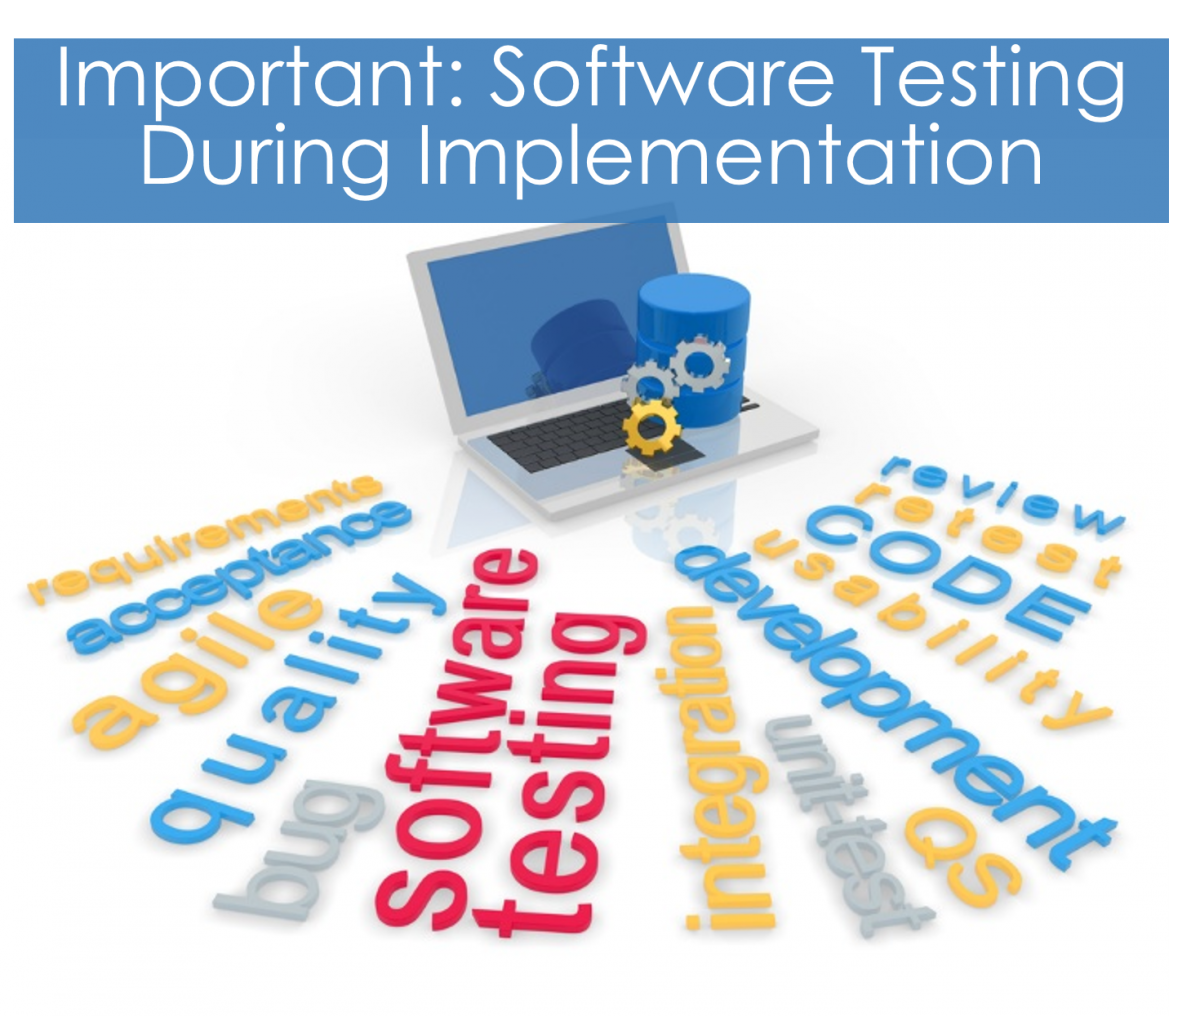 Importance of software testing